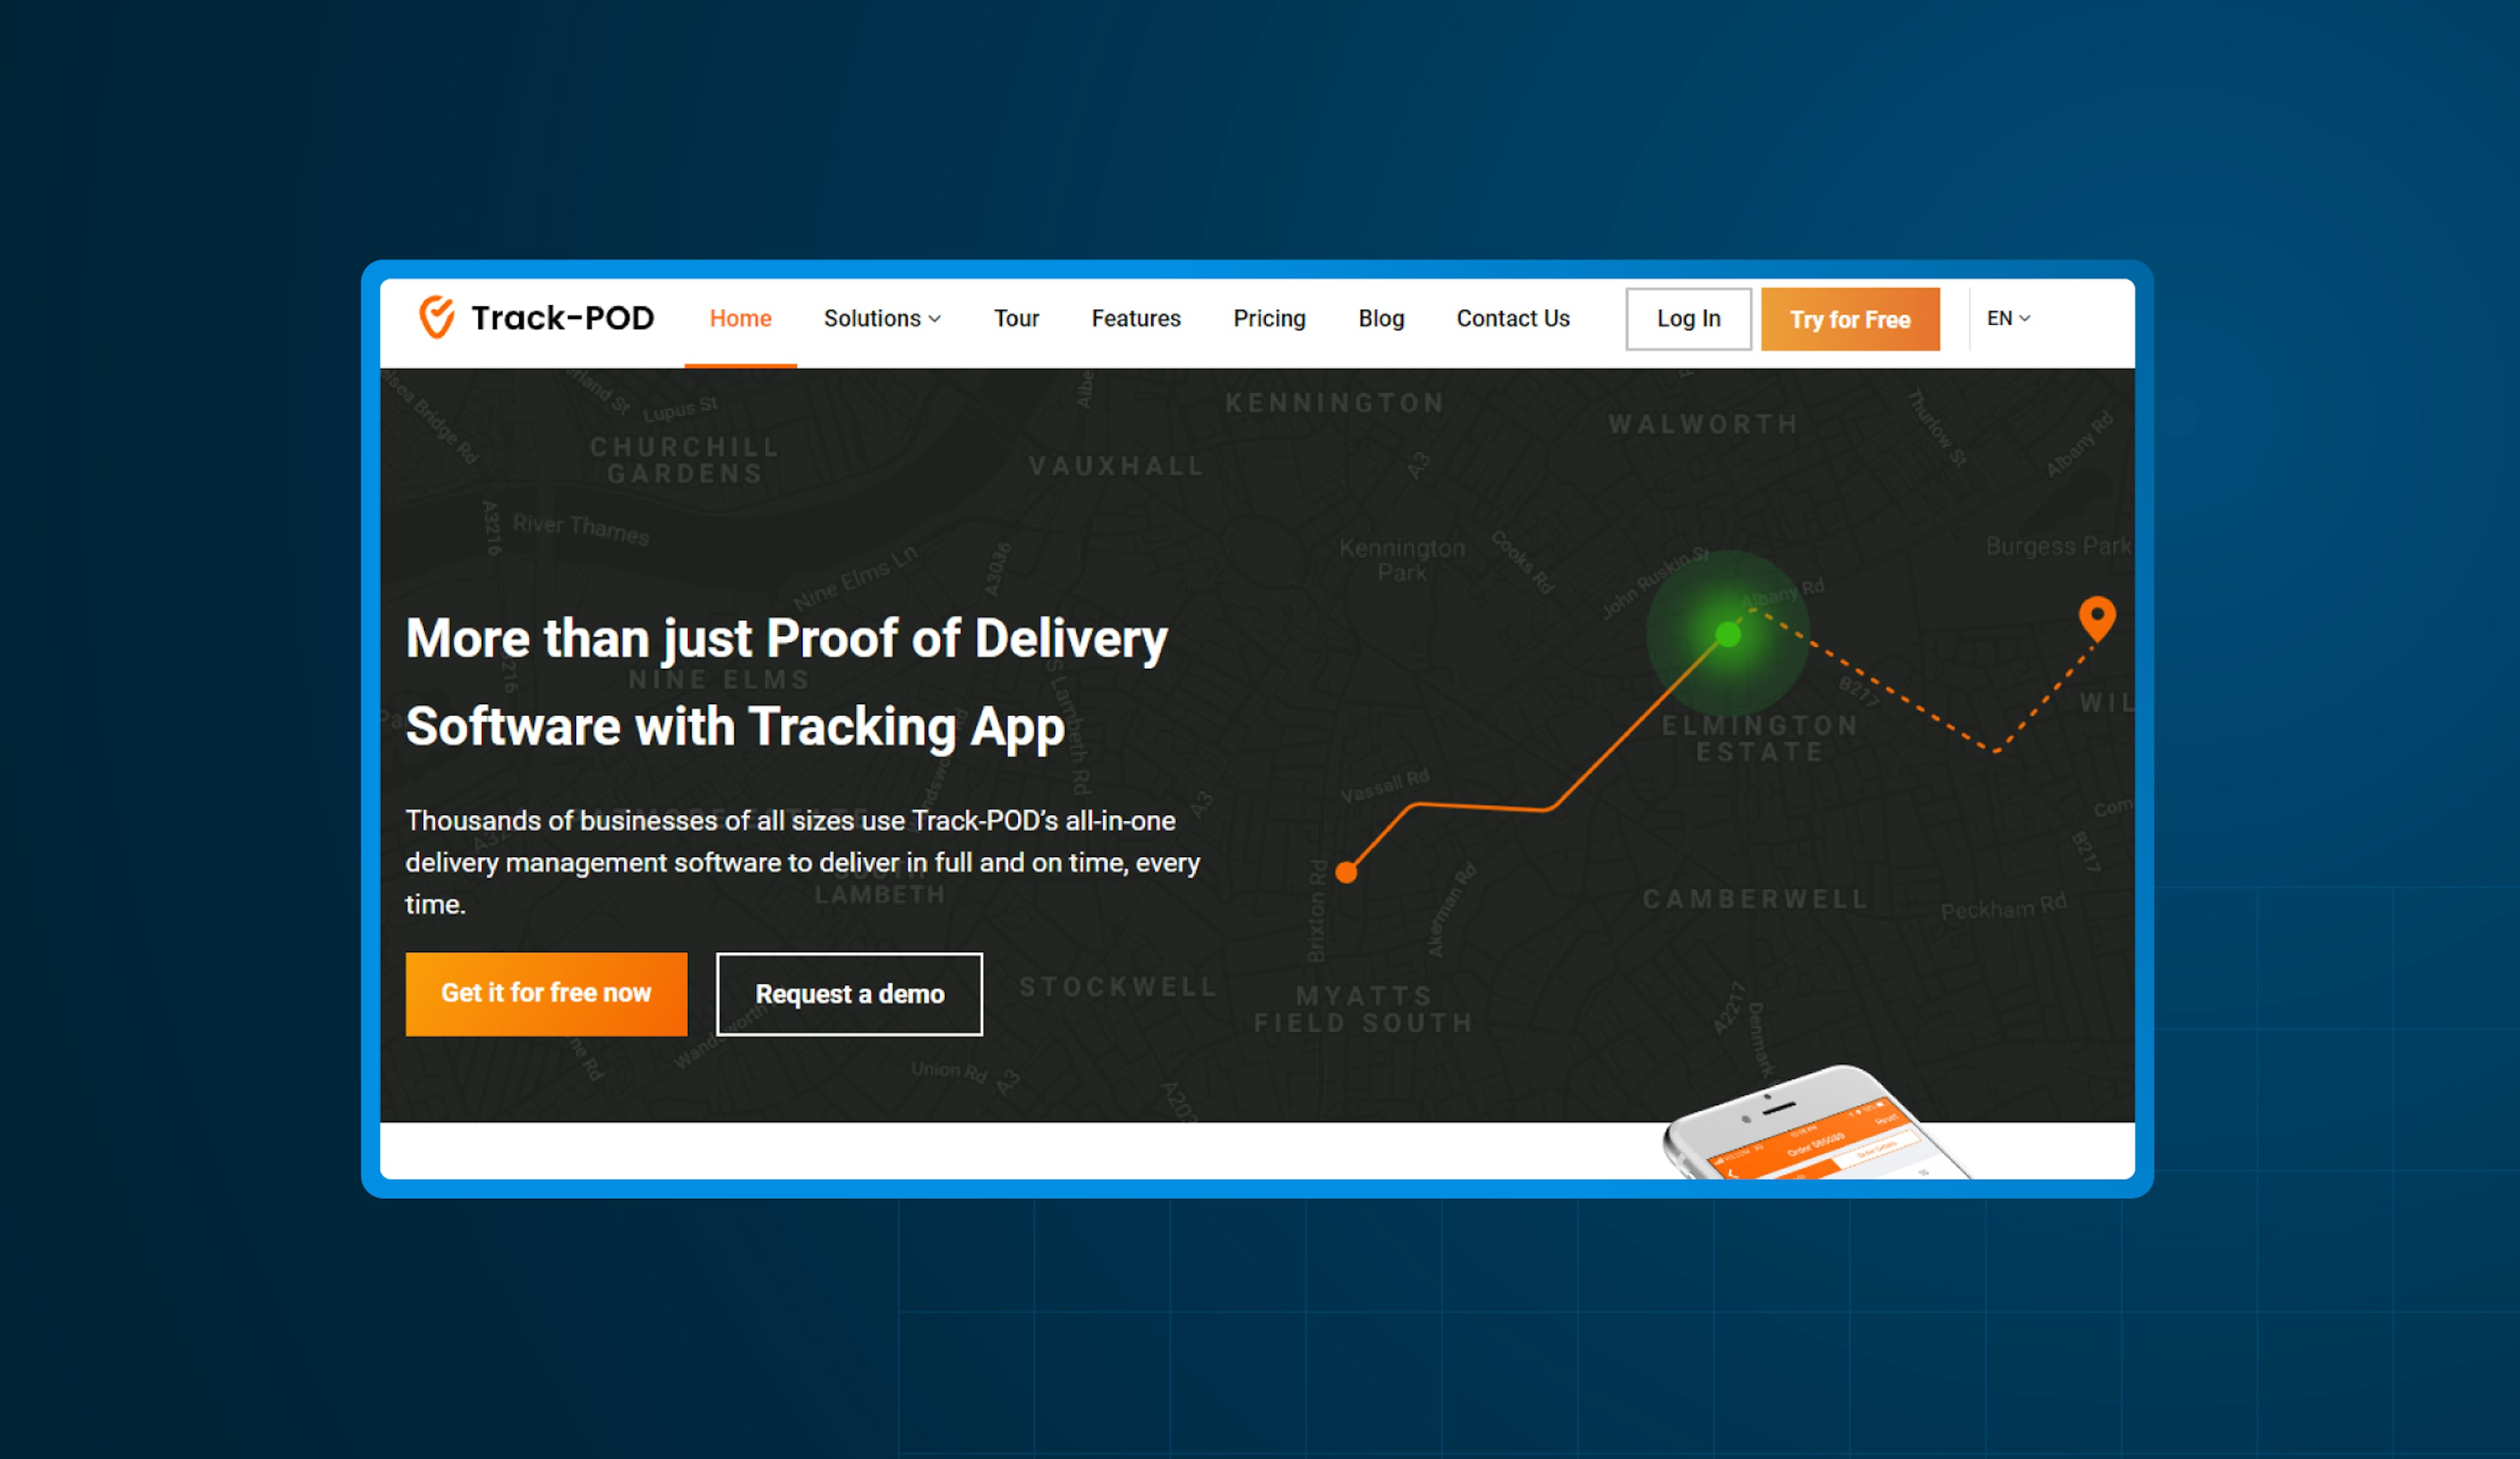 Image of the Track-POD proof of delivery app home page